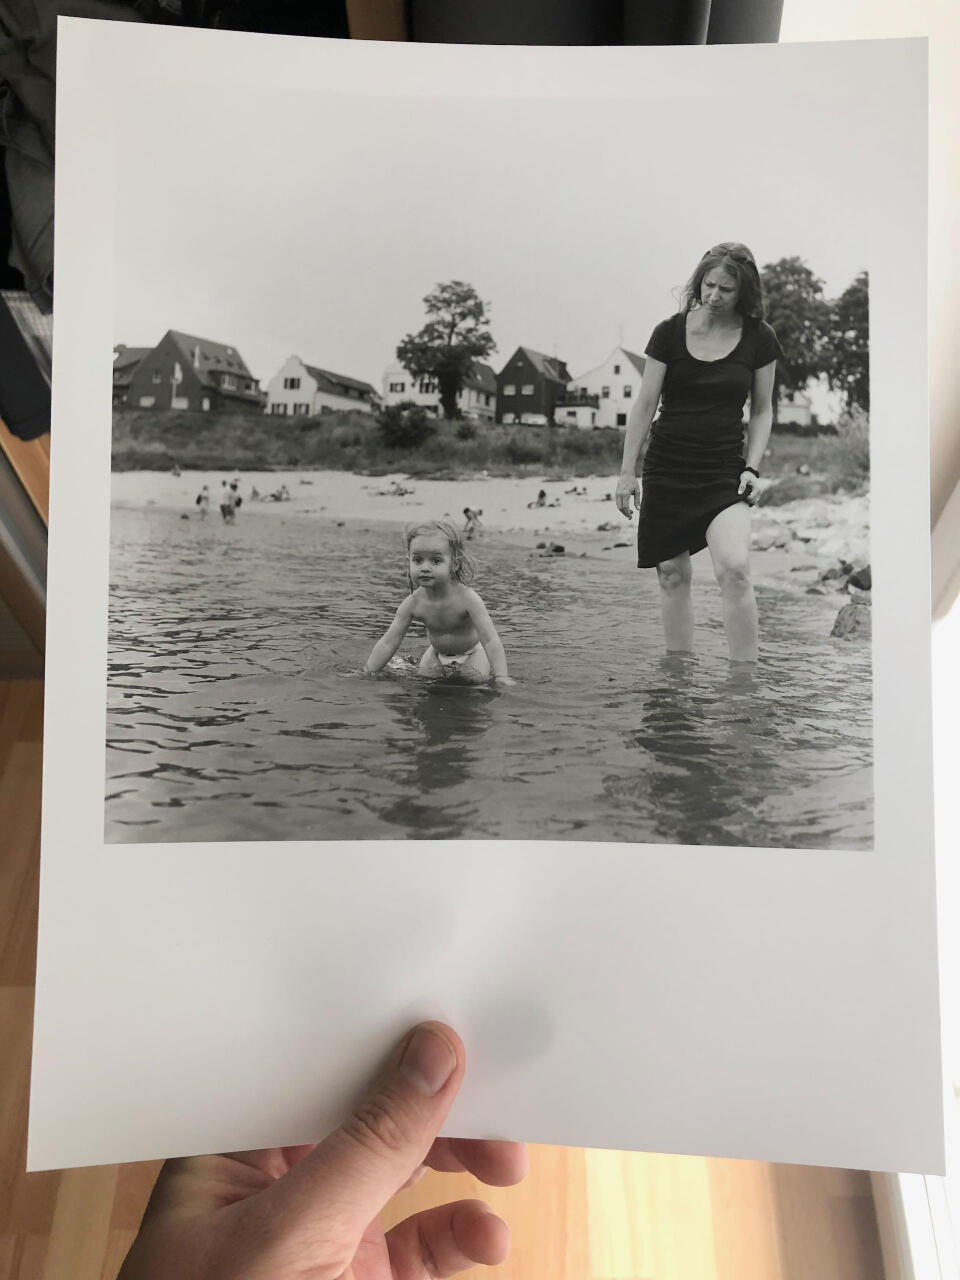 A child waist-high in a river. A woman next to it. Both facing the camera, but not looking into it. A beach and houses in the background.